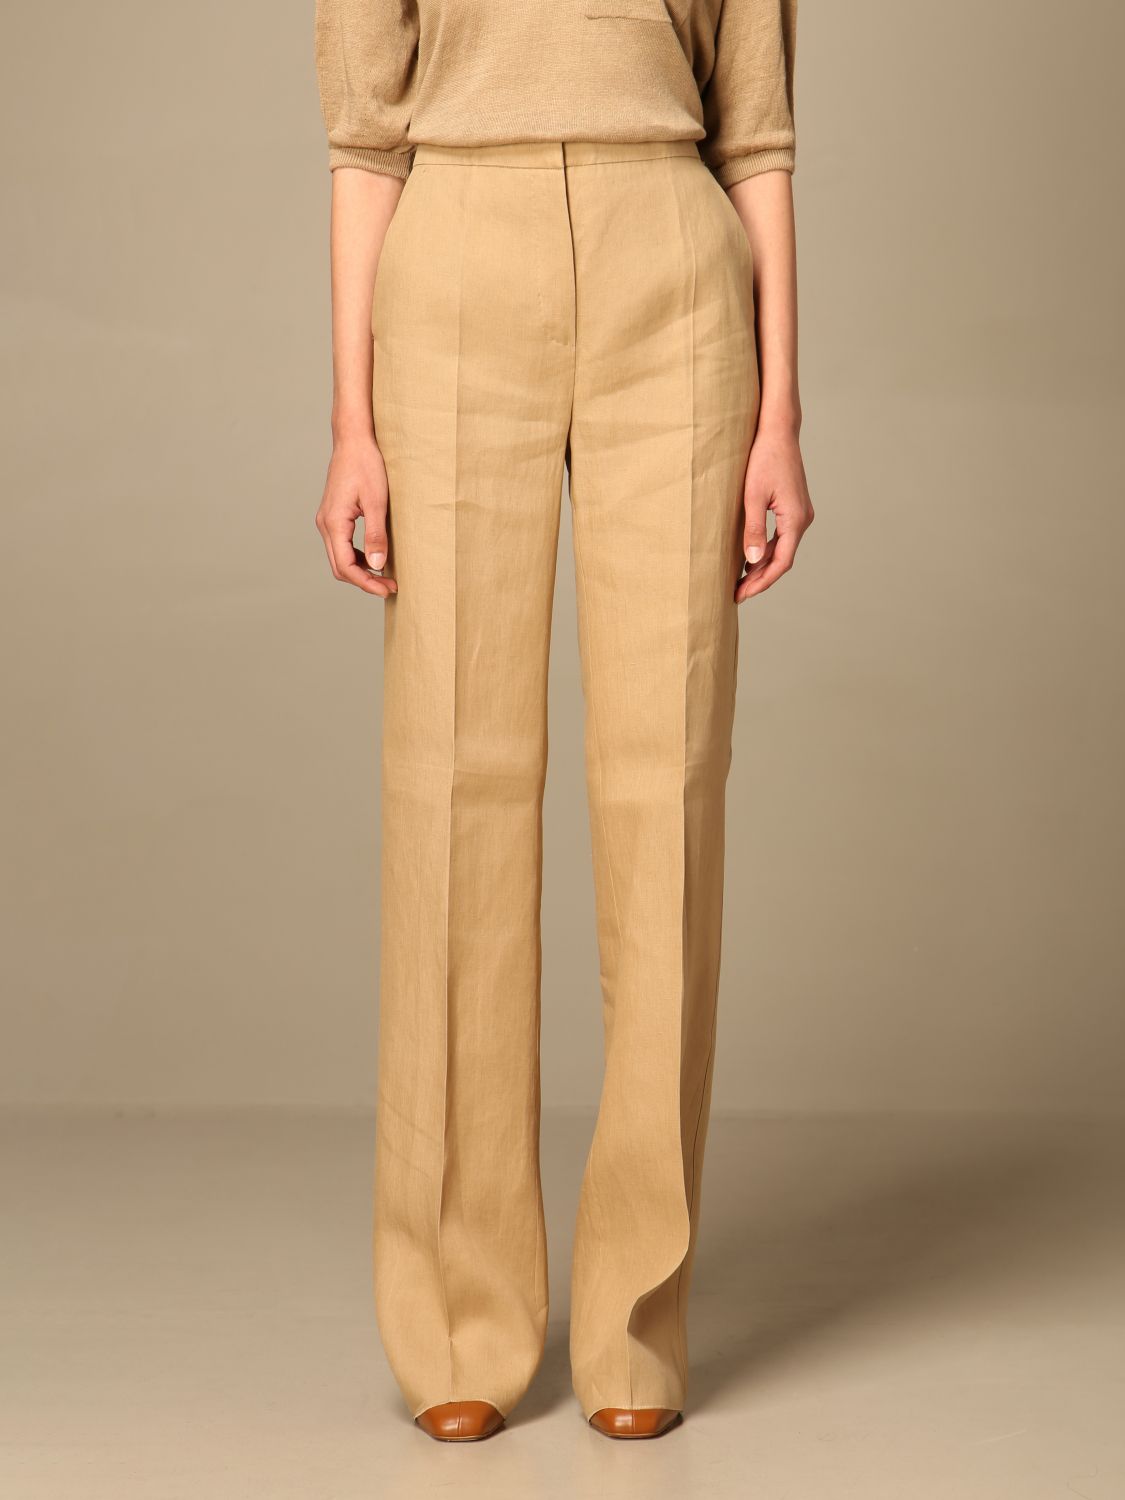 Max  Co By Max Mara Cigarette Trousers Size 8  The Modern Style